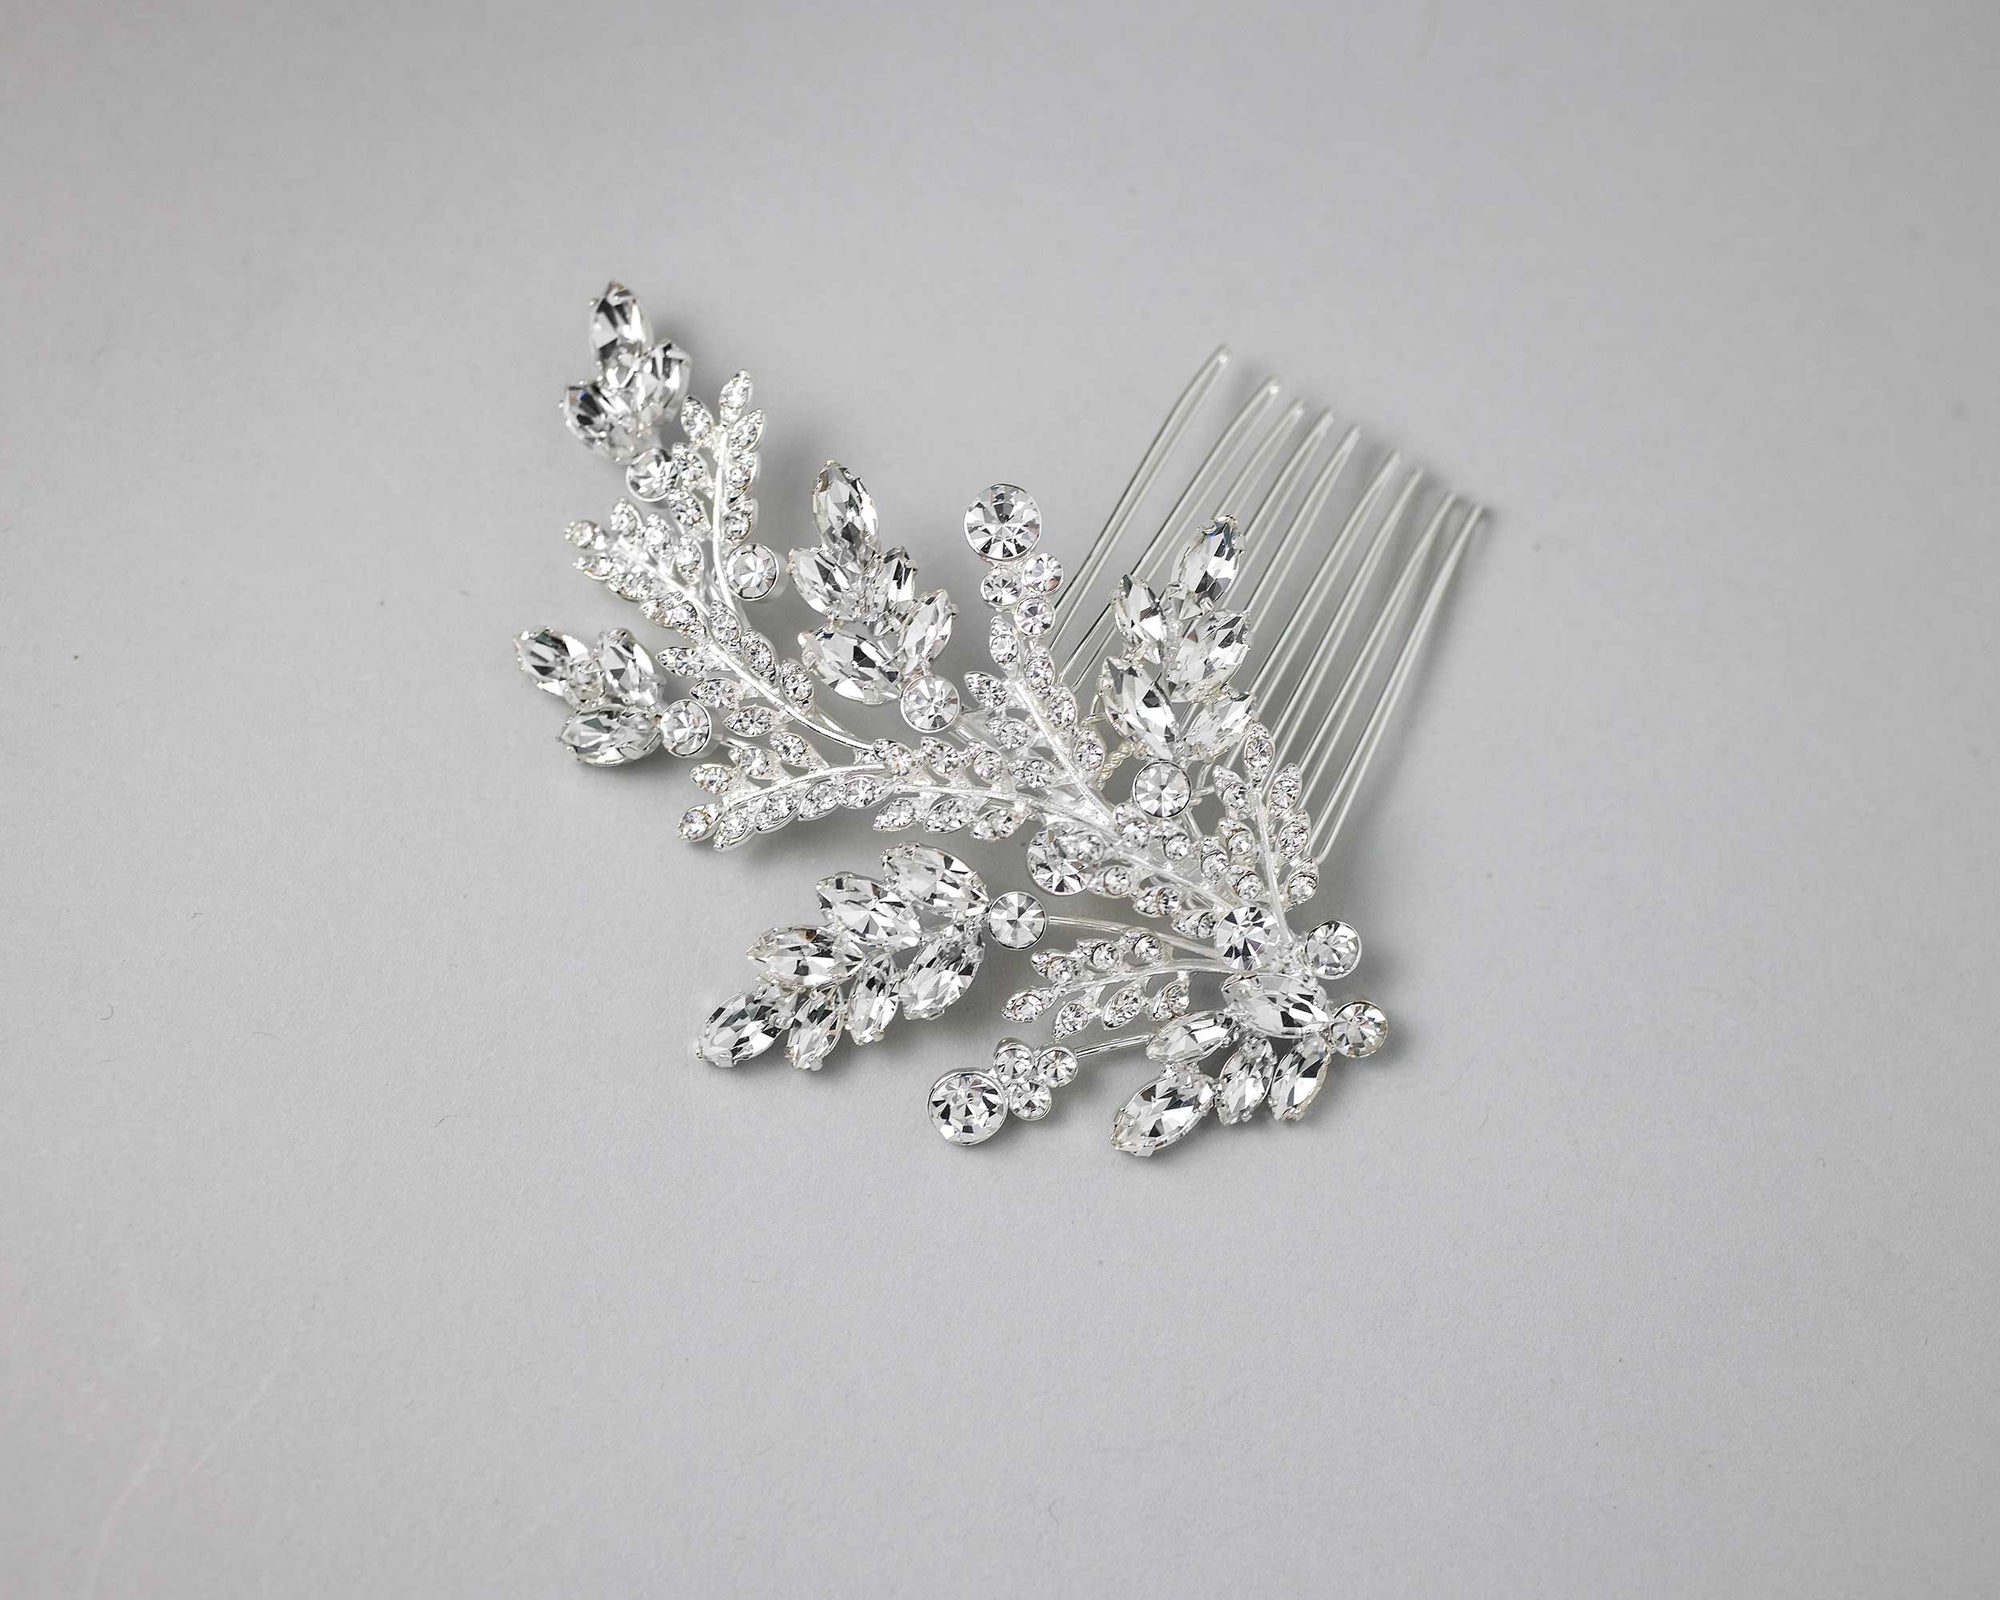 Bridal Comb of Delicate Crystal Fern Fronds